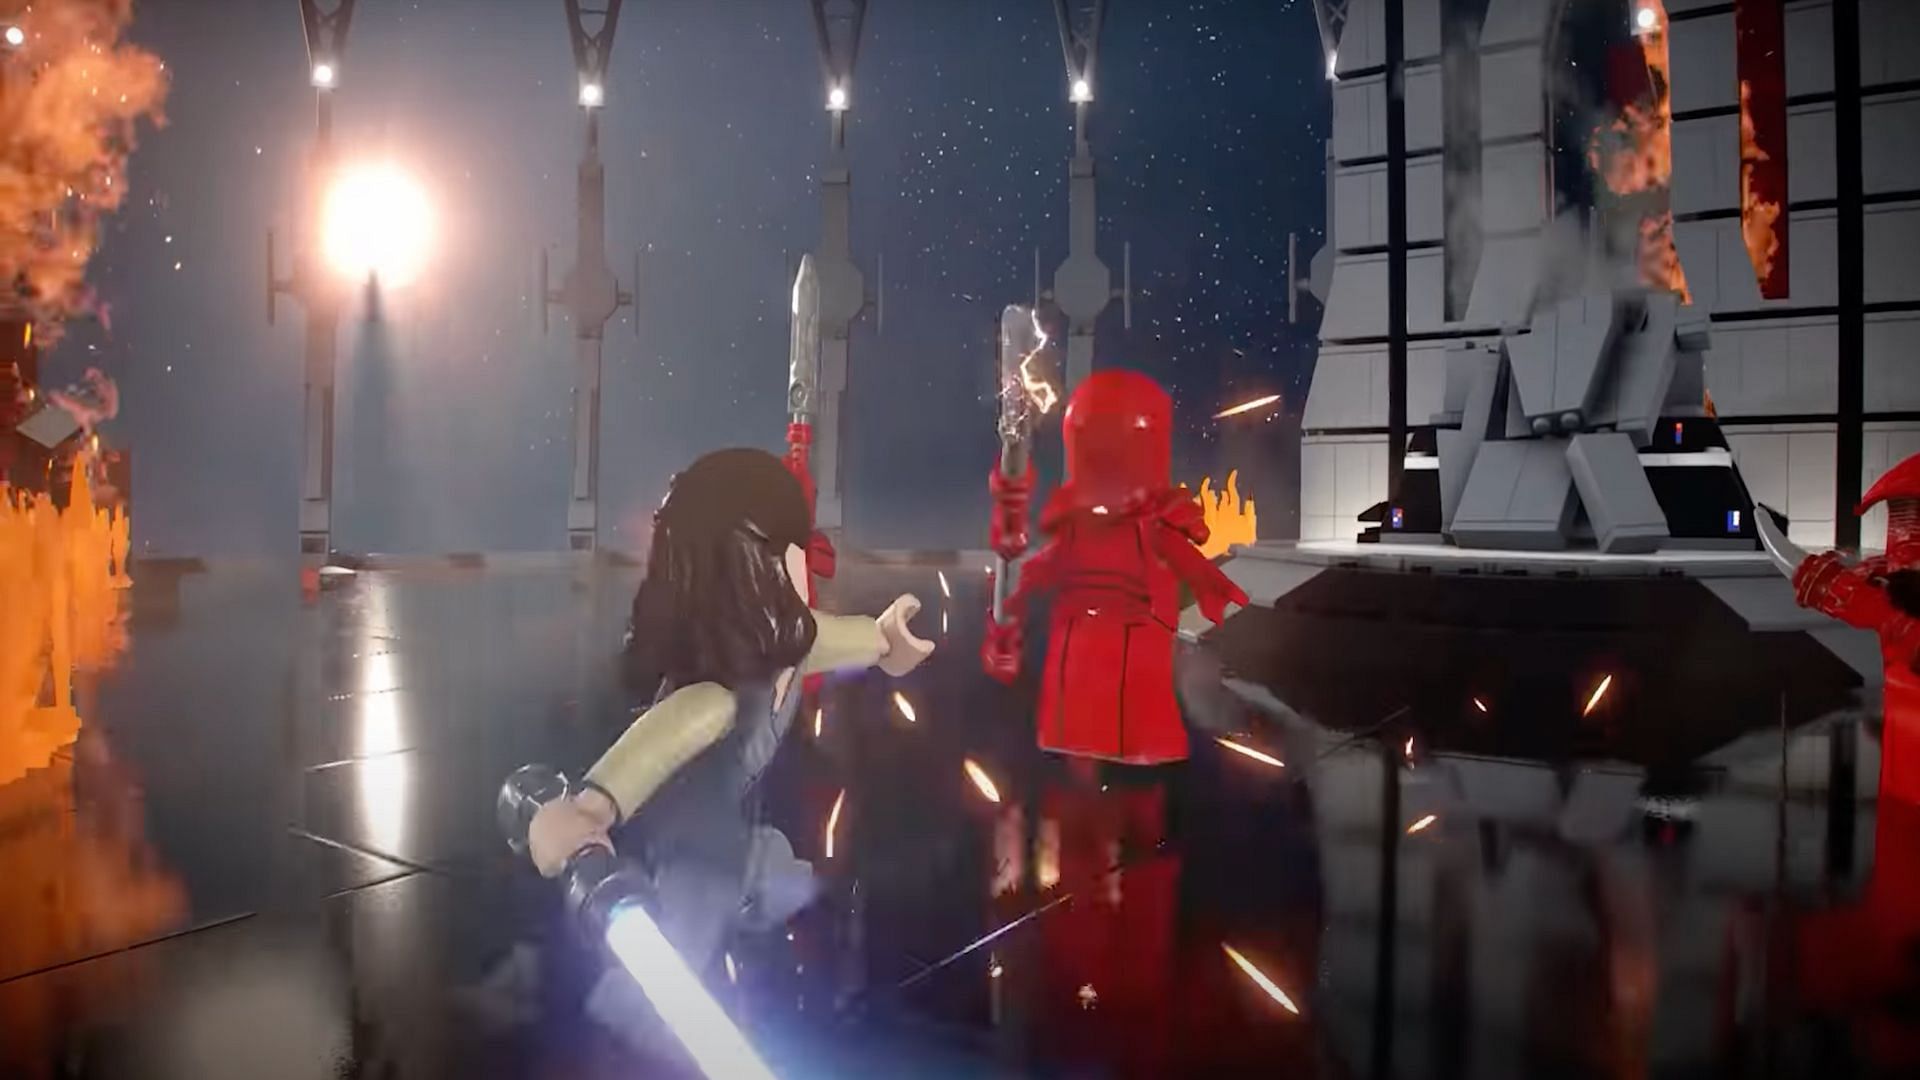 Players of Lego Star Wars: The Skywalker Saga can use the Breaker Tool to get through the wall and reach the Datacard (Image via Warner Brothers)